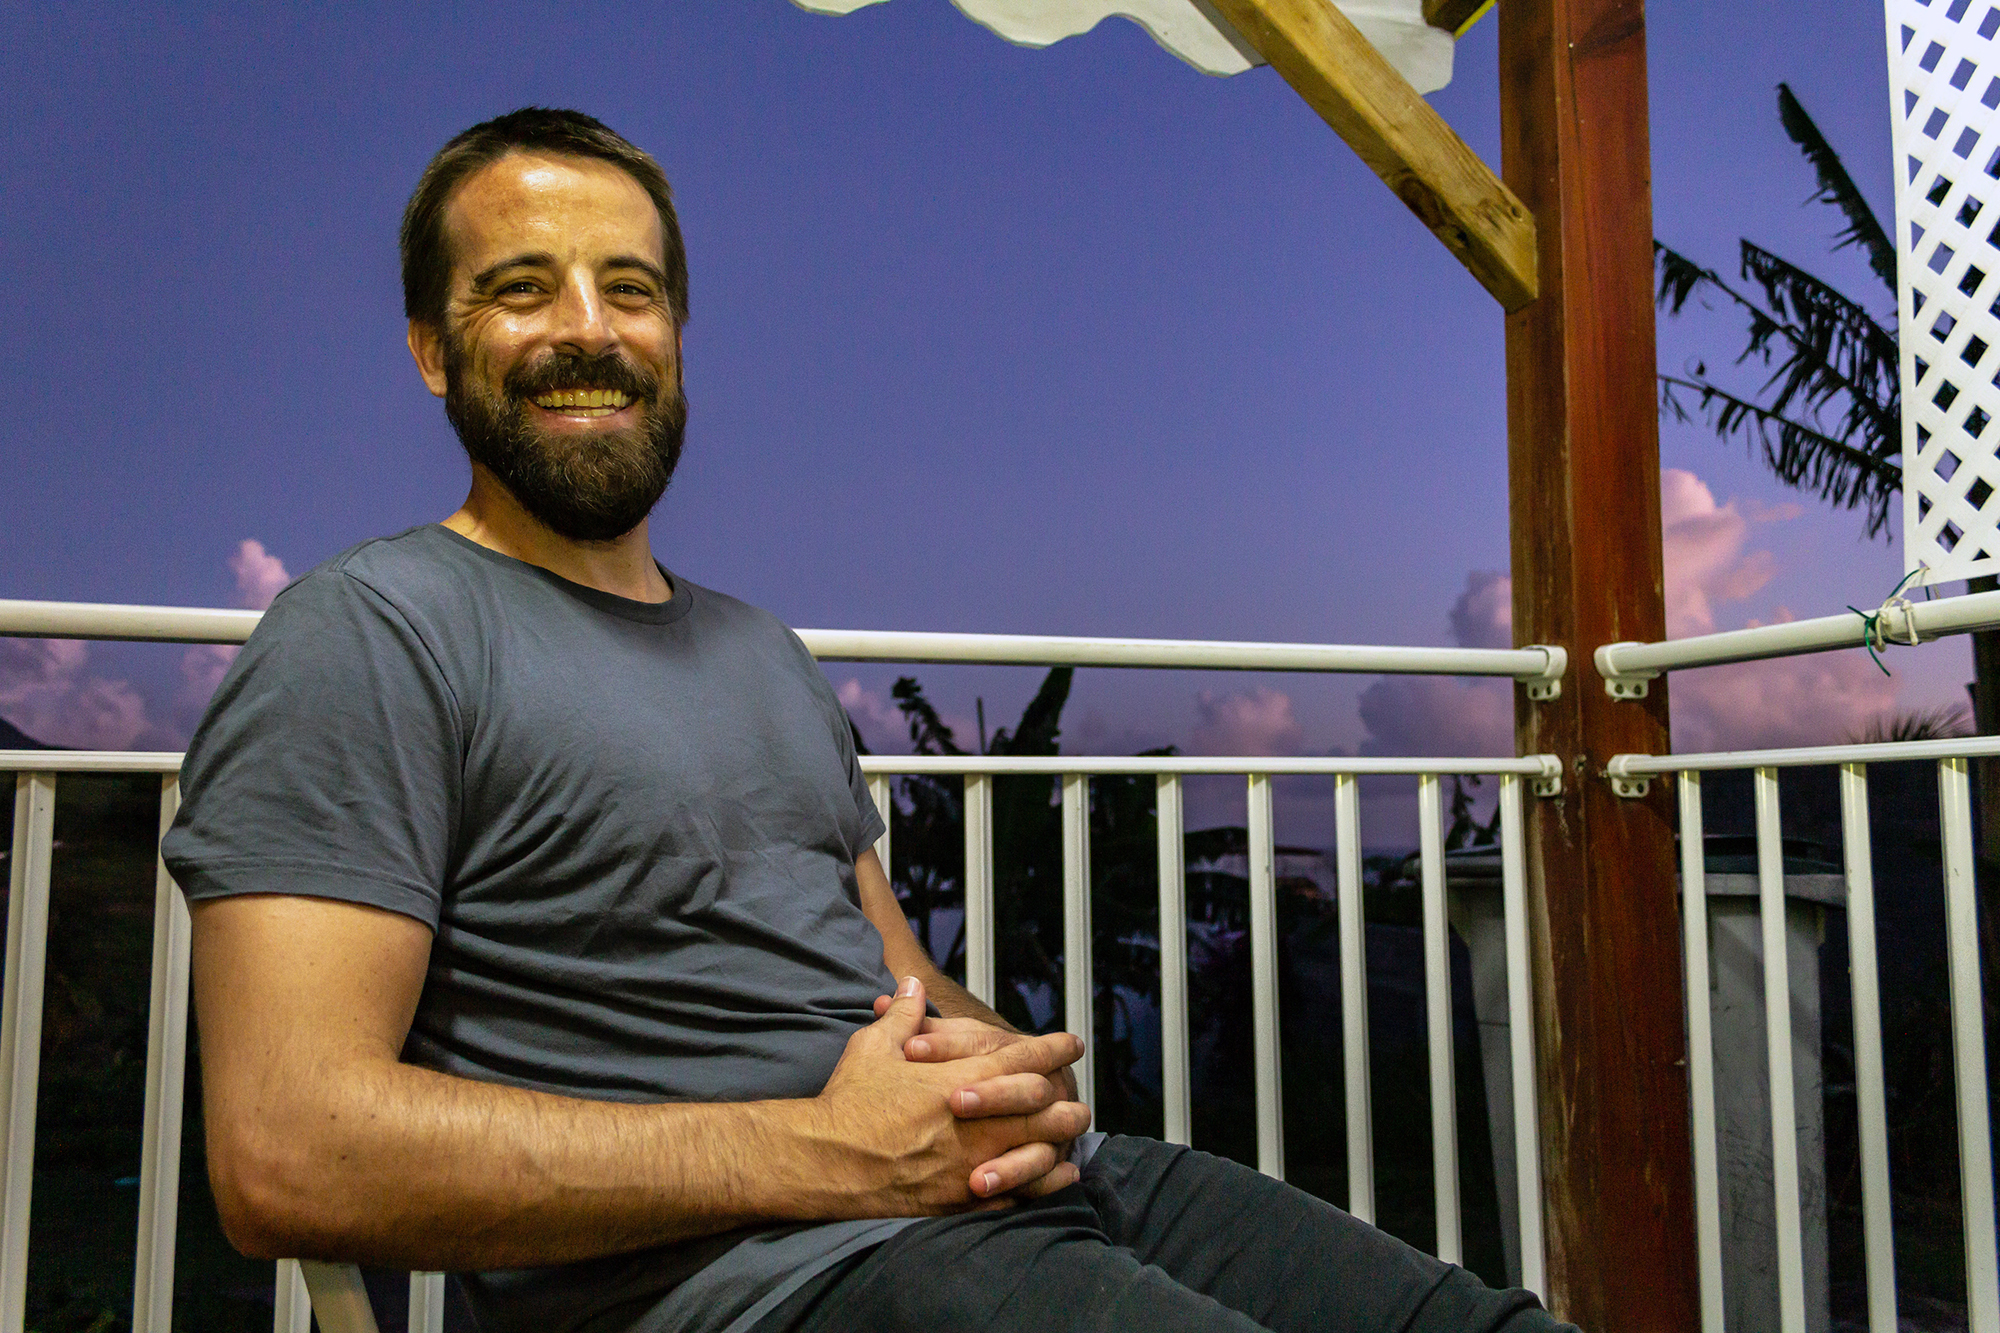 Man with beard smiles at camera sitting on a balcony with a sunset and palm trees behind him, hands folded on his lap.